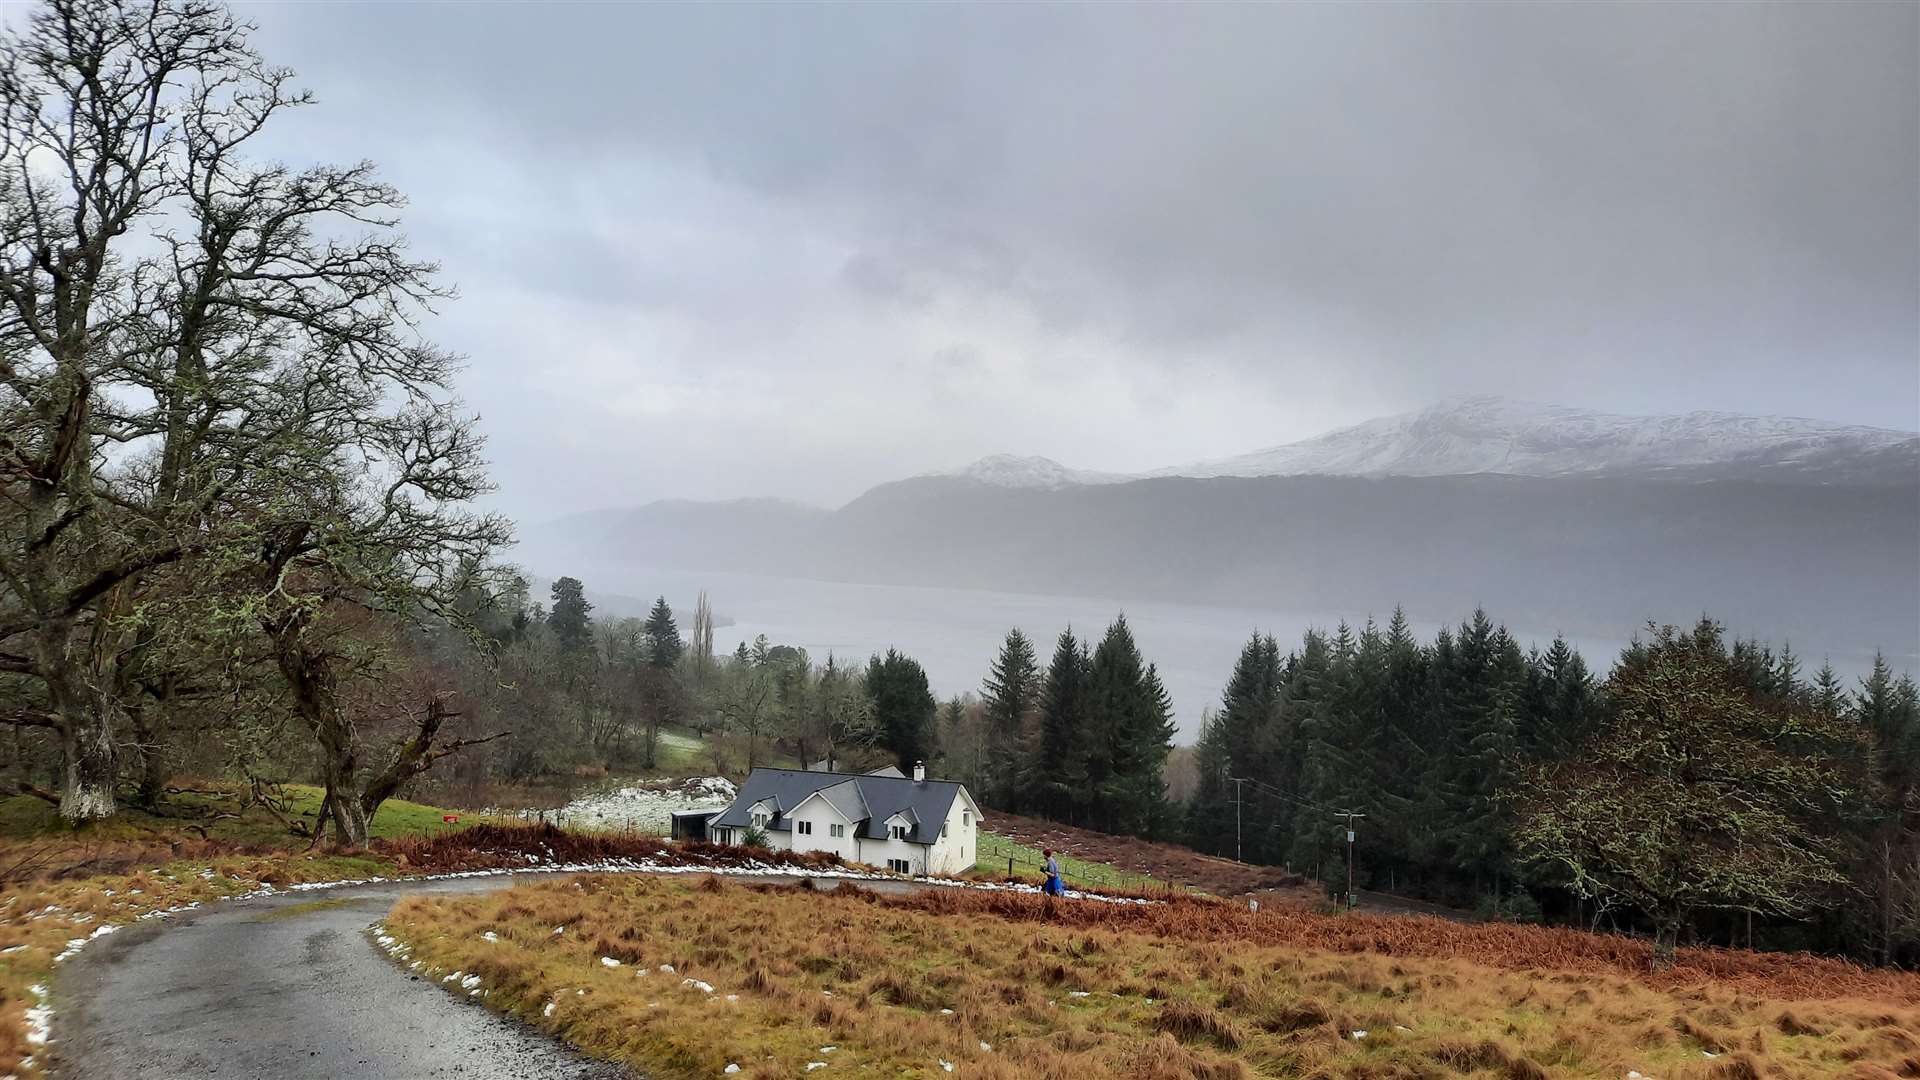 The track up to Easter Boleskine looking back over Loch Ness and Meall Fuar-mhonaidh.